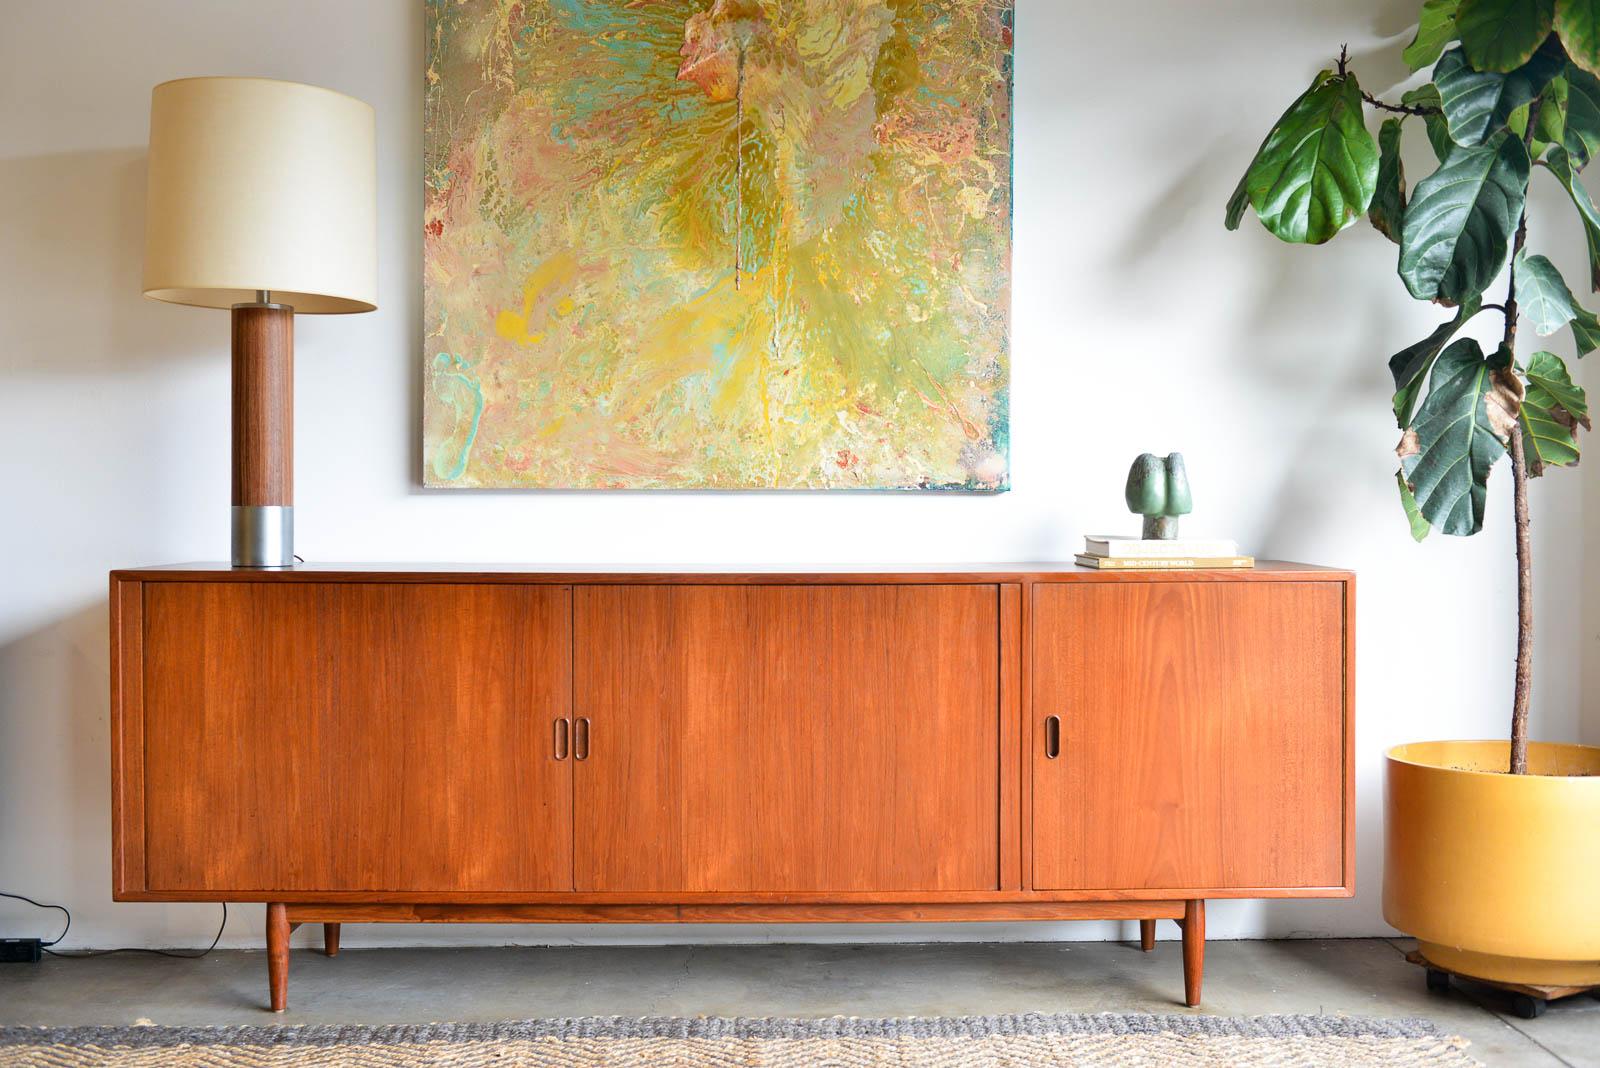 Arne Vodder for Sibast large tambour door credenza, circa 1960. Teak cabinet with two sliding tambour doors and one swing open door on the right. Inside has plenty of storage with adjustable and removable shelving and the right cabinet was